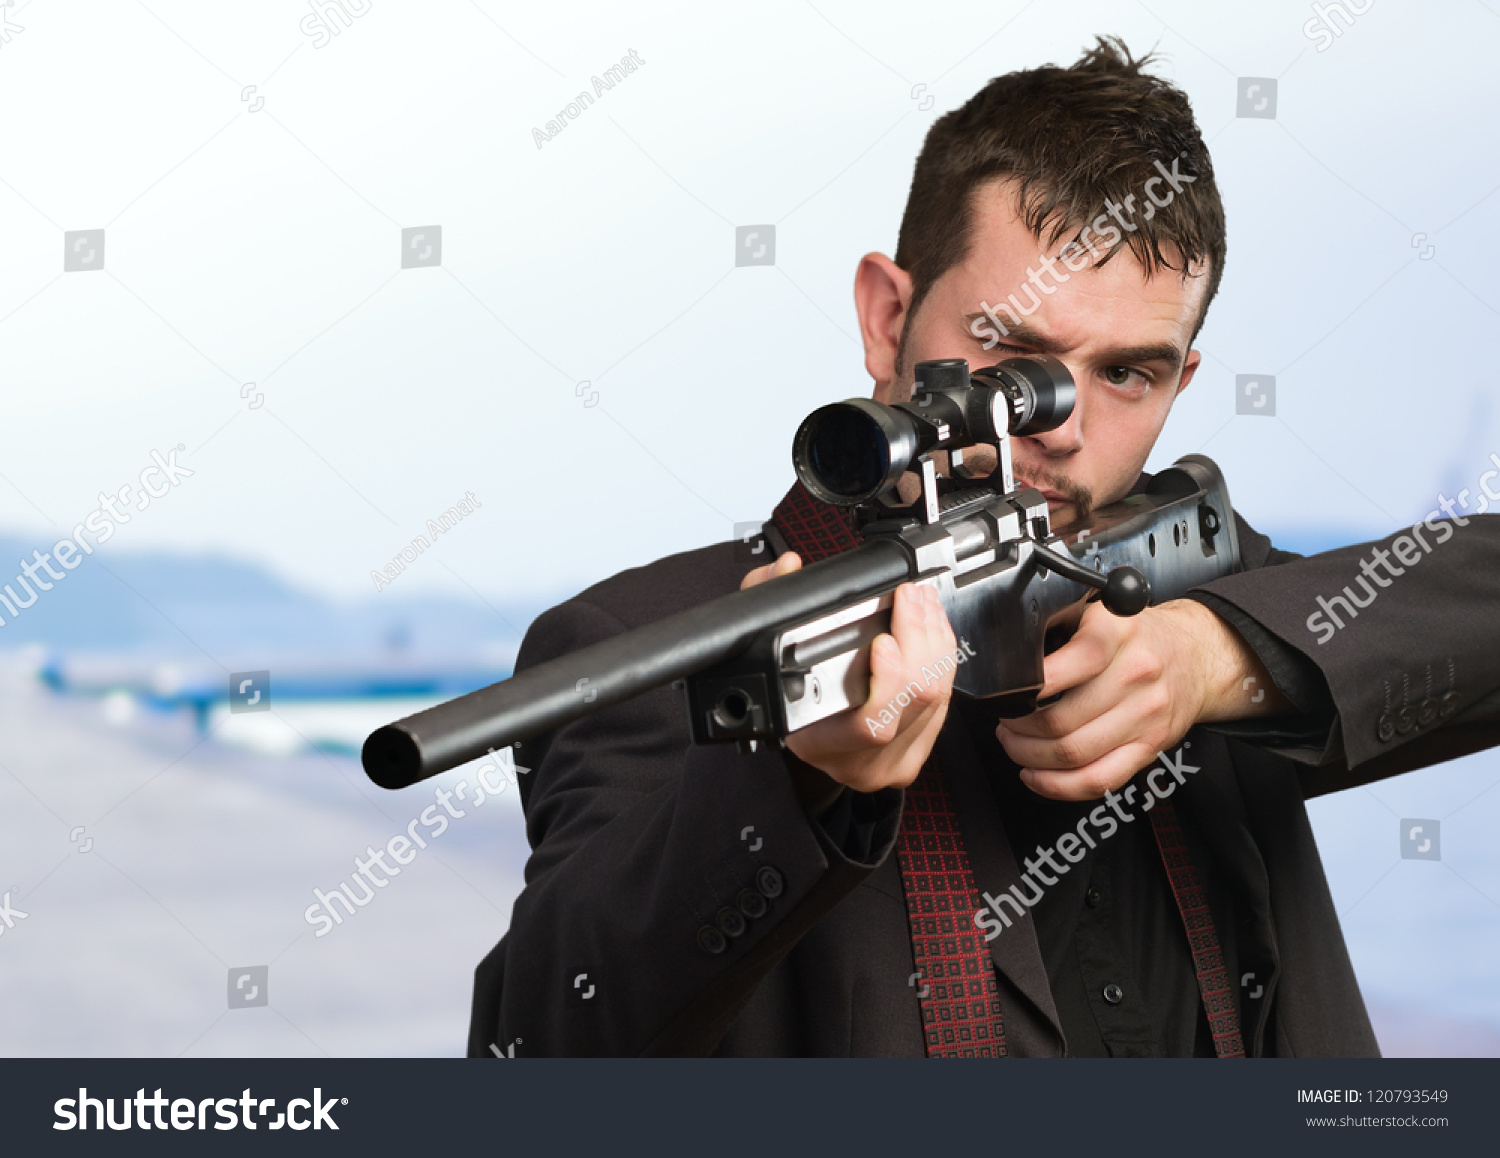 stock-photo-young-man-aiming-with-rifle-at-a-port-120793549.jpg